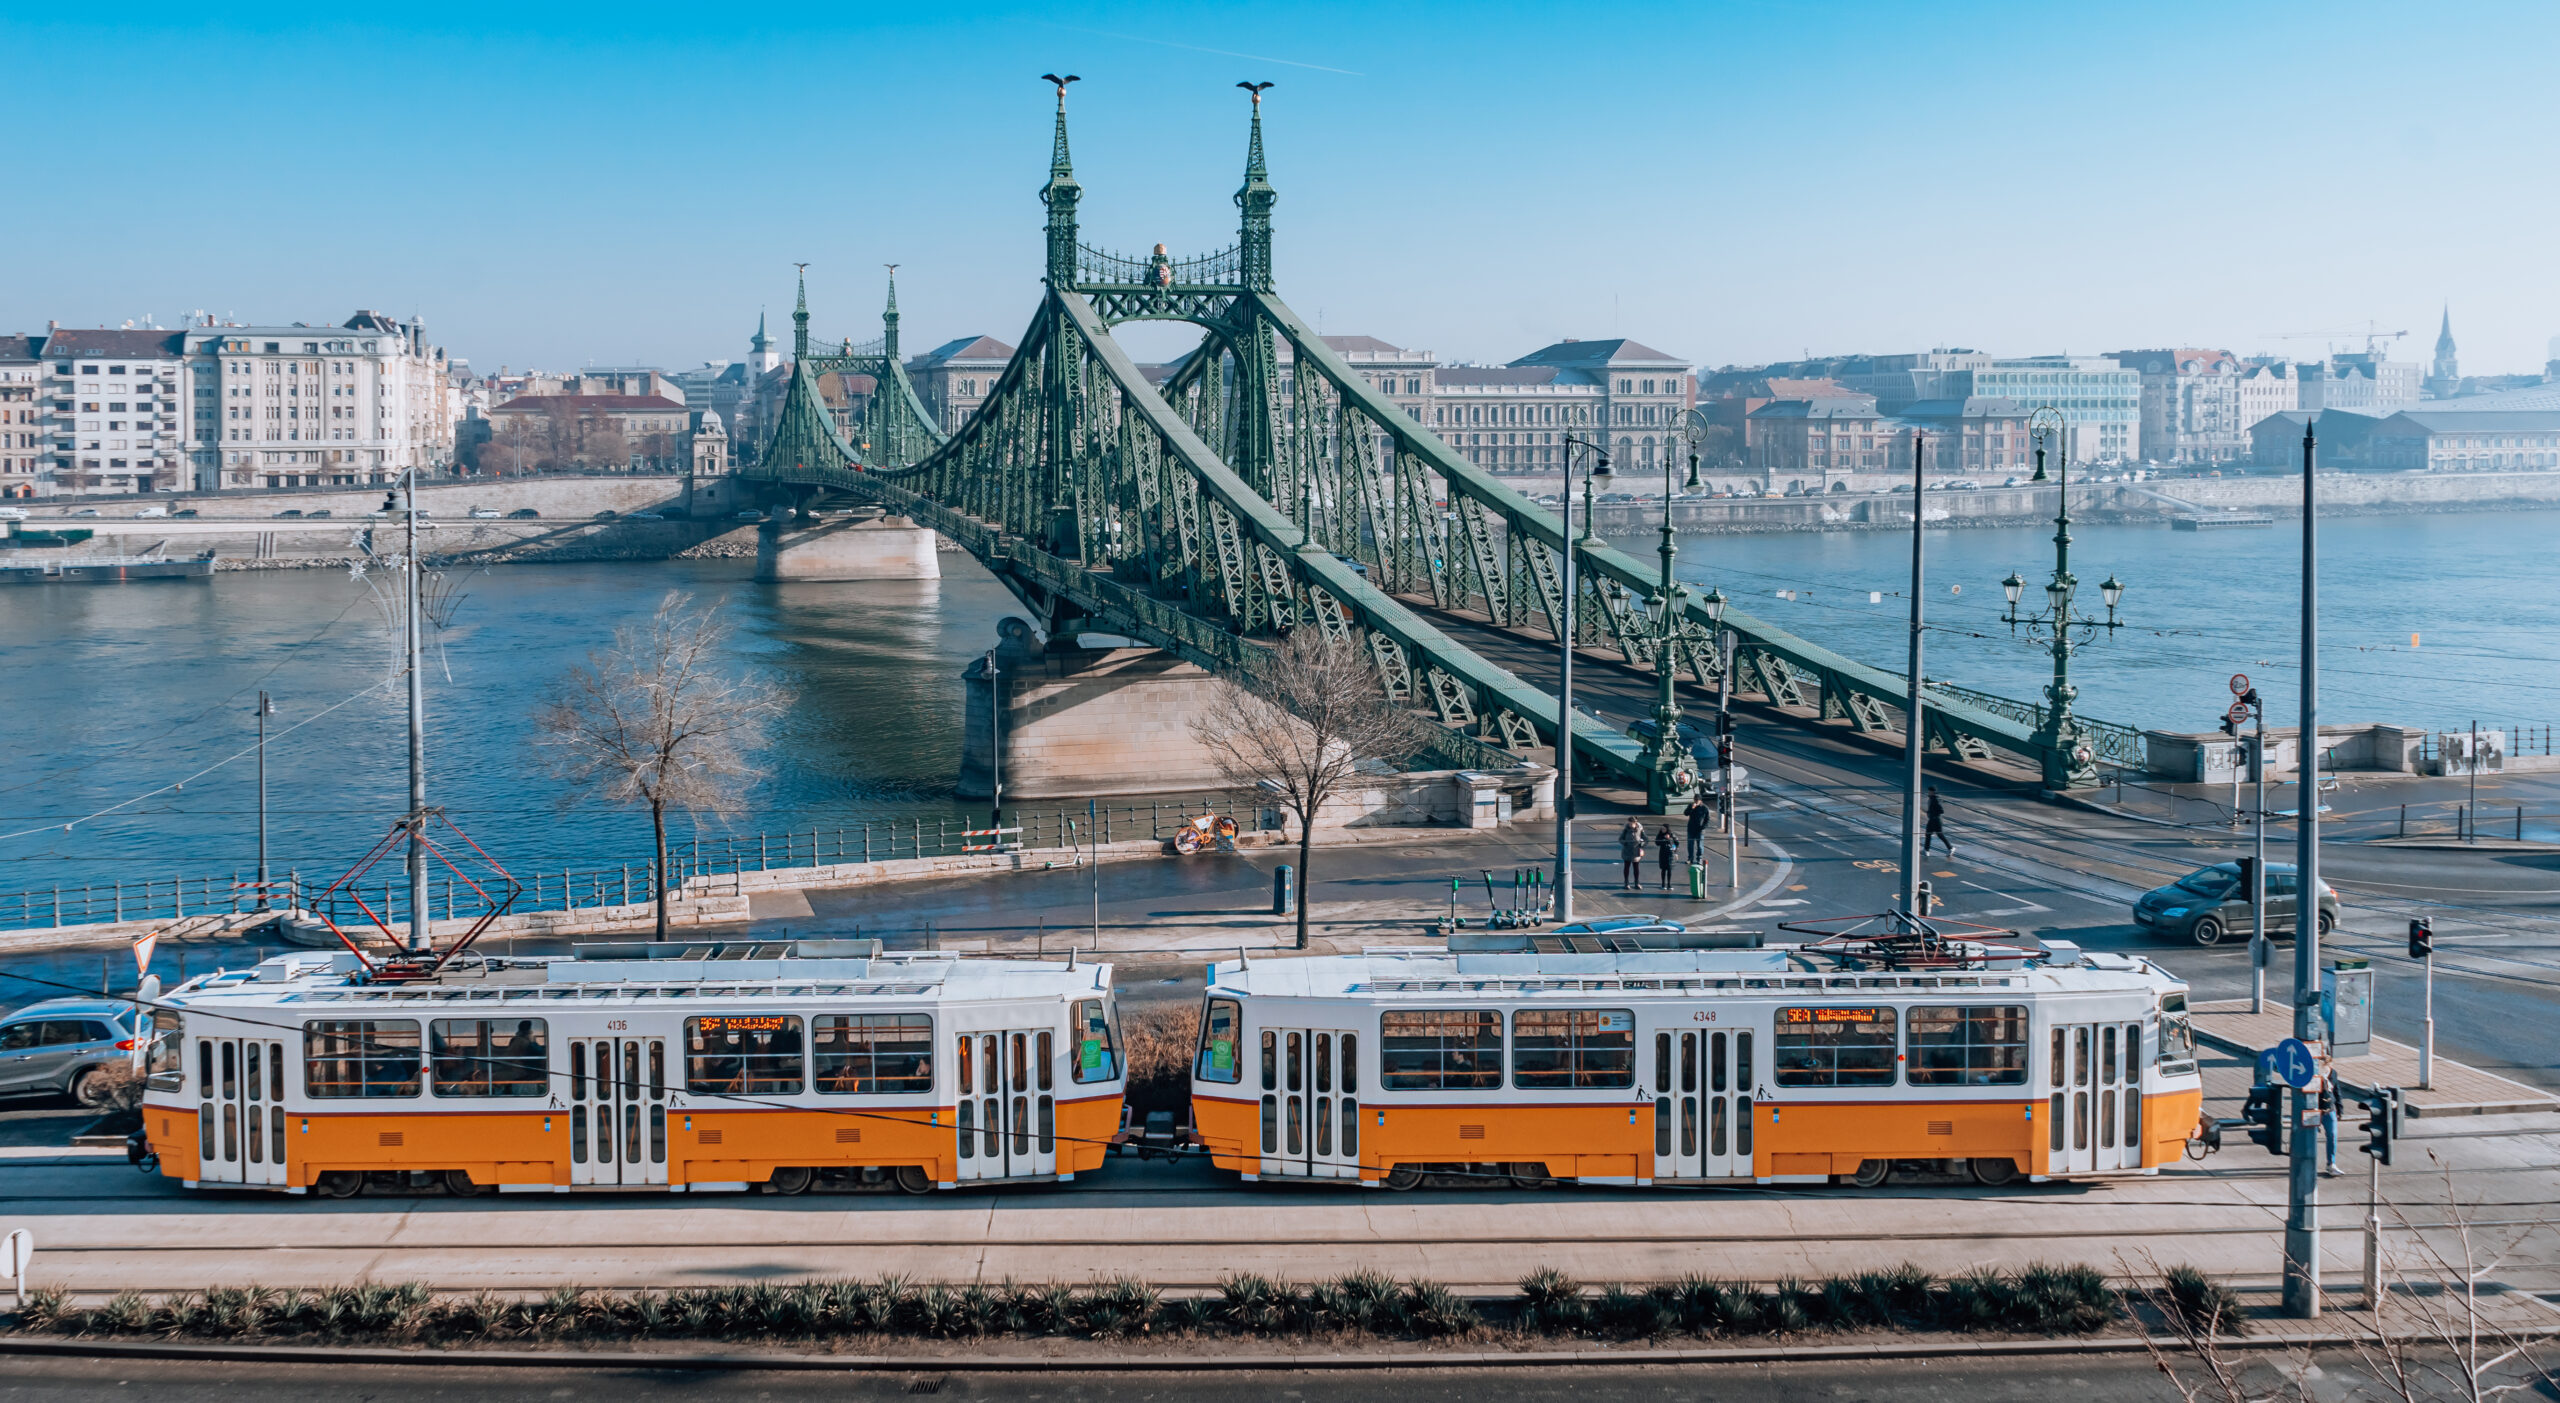 View of the cheery yellow Budapest tram running besides the Danube river